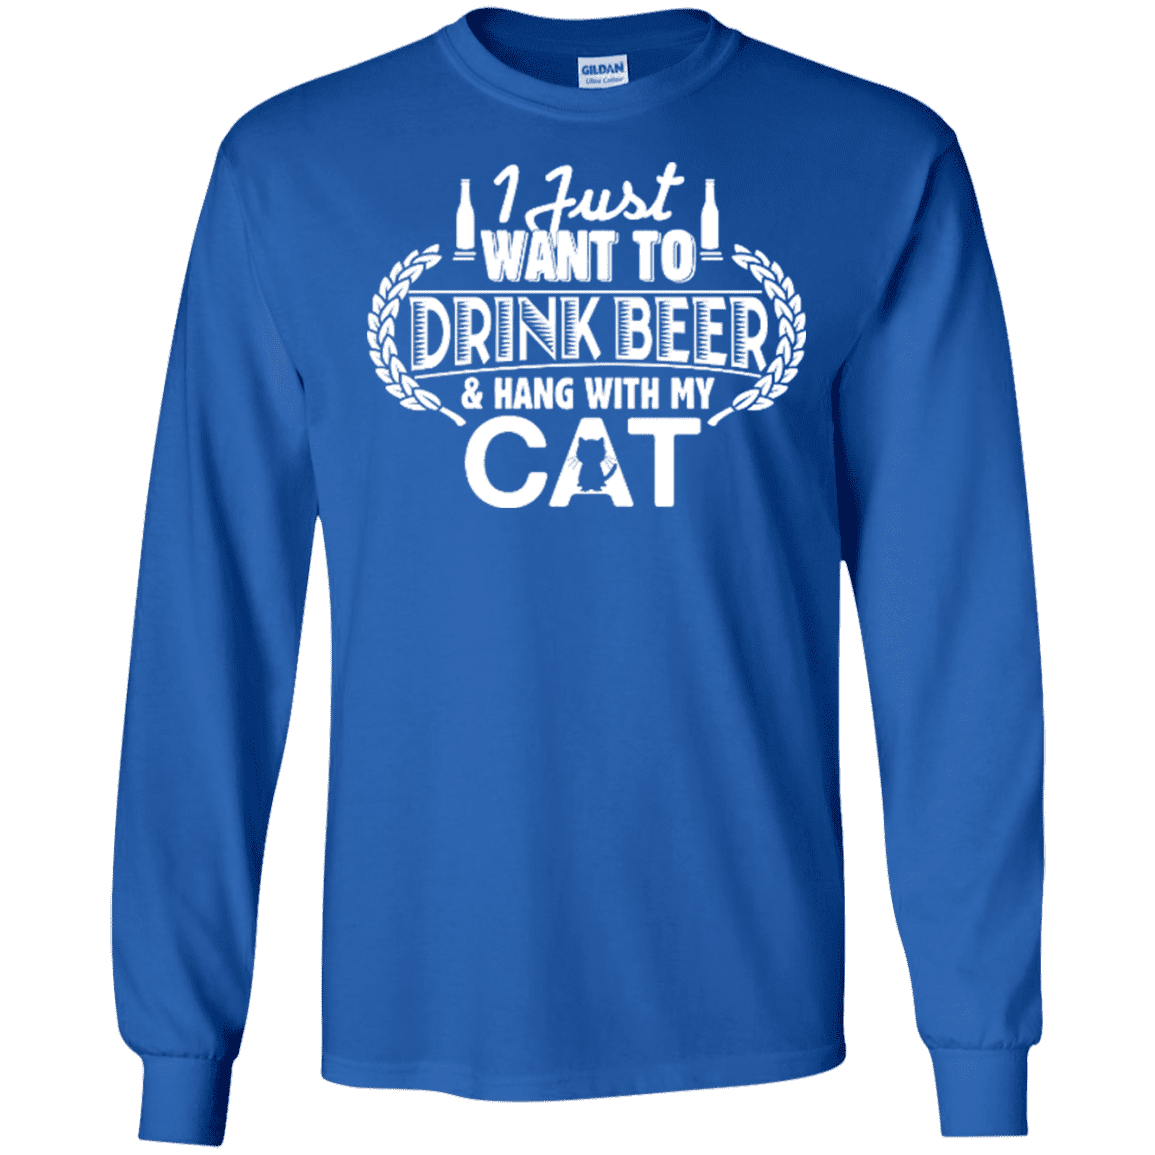 Drink Beer Hang With My Cat - Long Sleeve T Shirt.